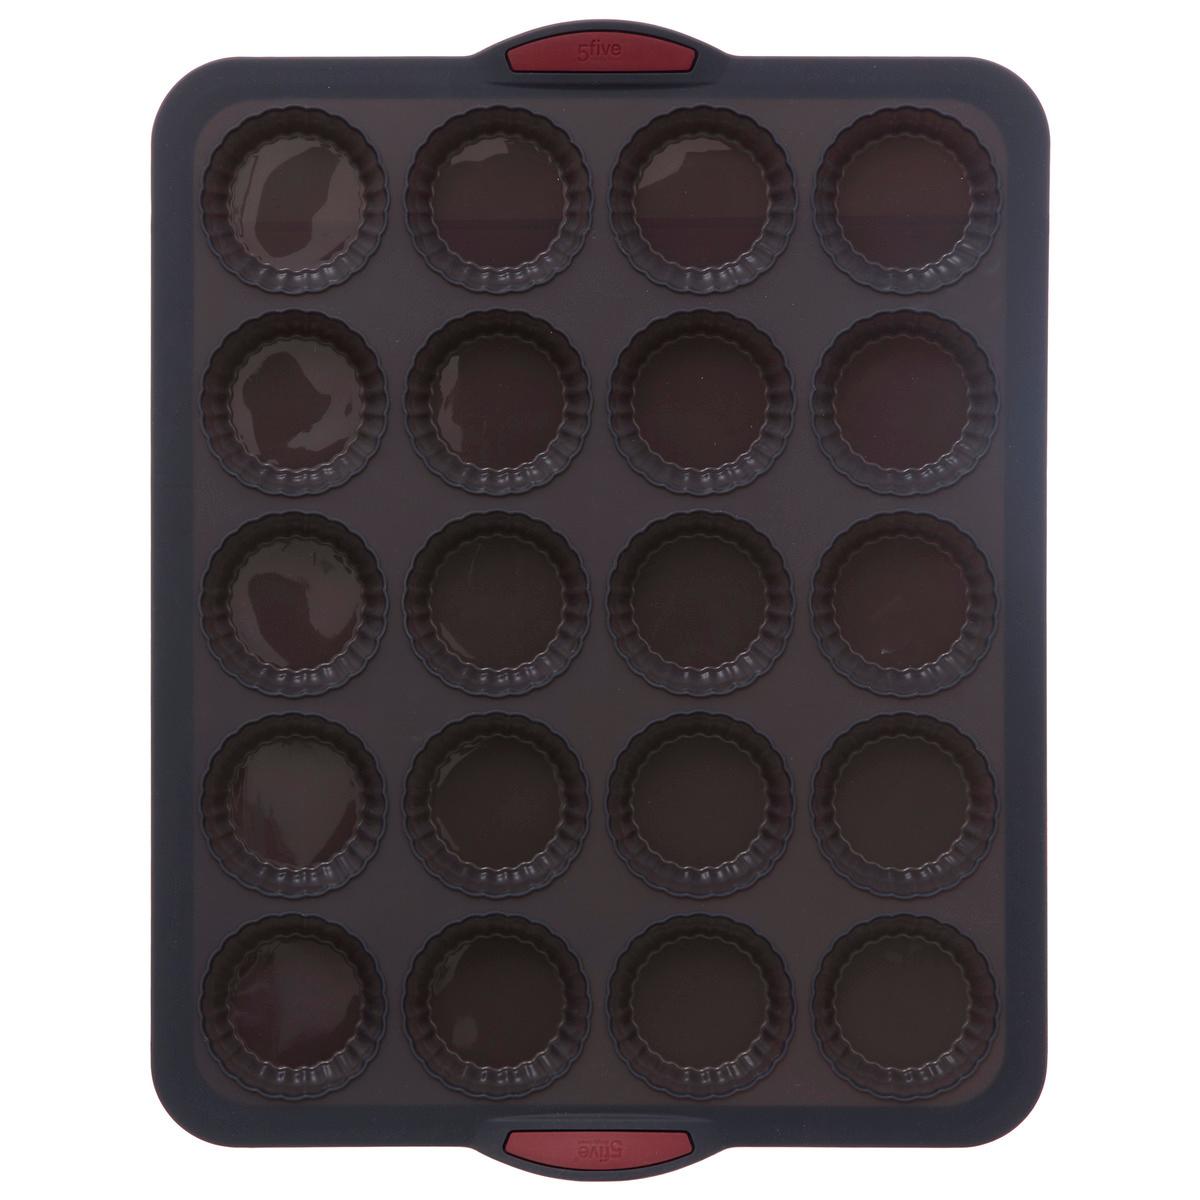 Silitop 12 piece silicone tart mold black red iture for Professionals -  Decoration Brands